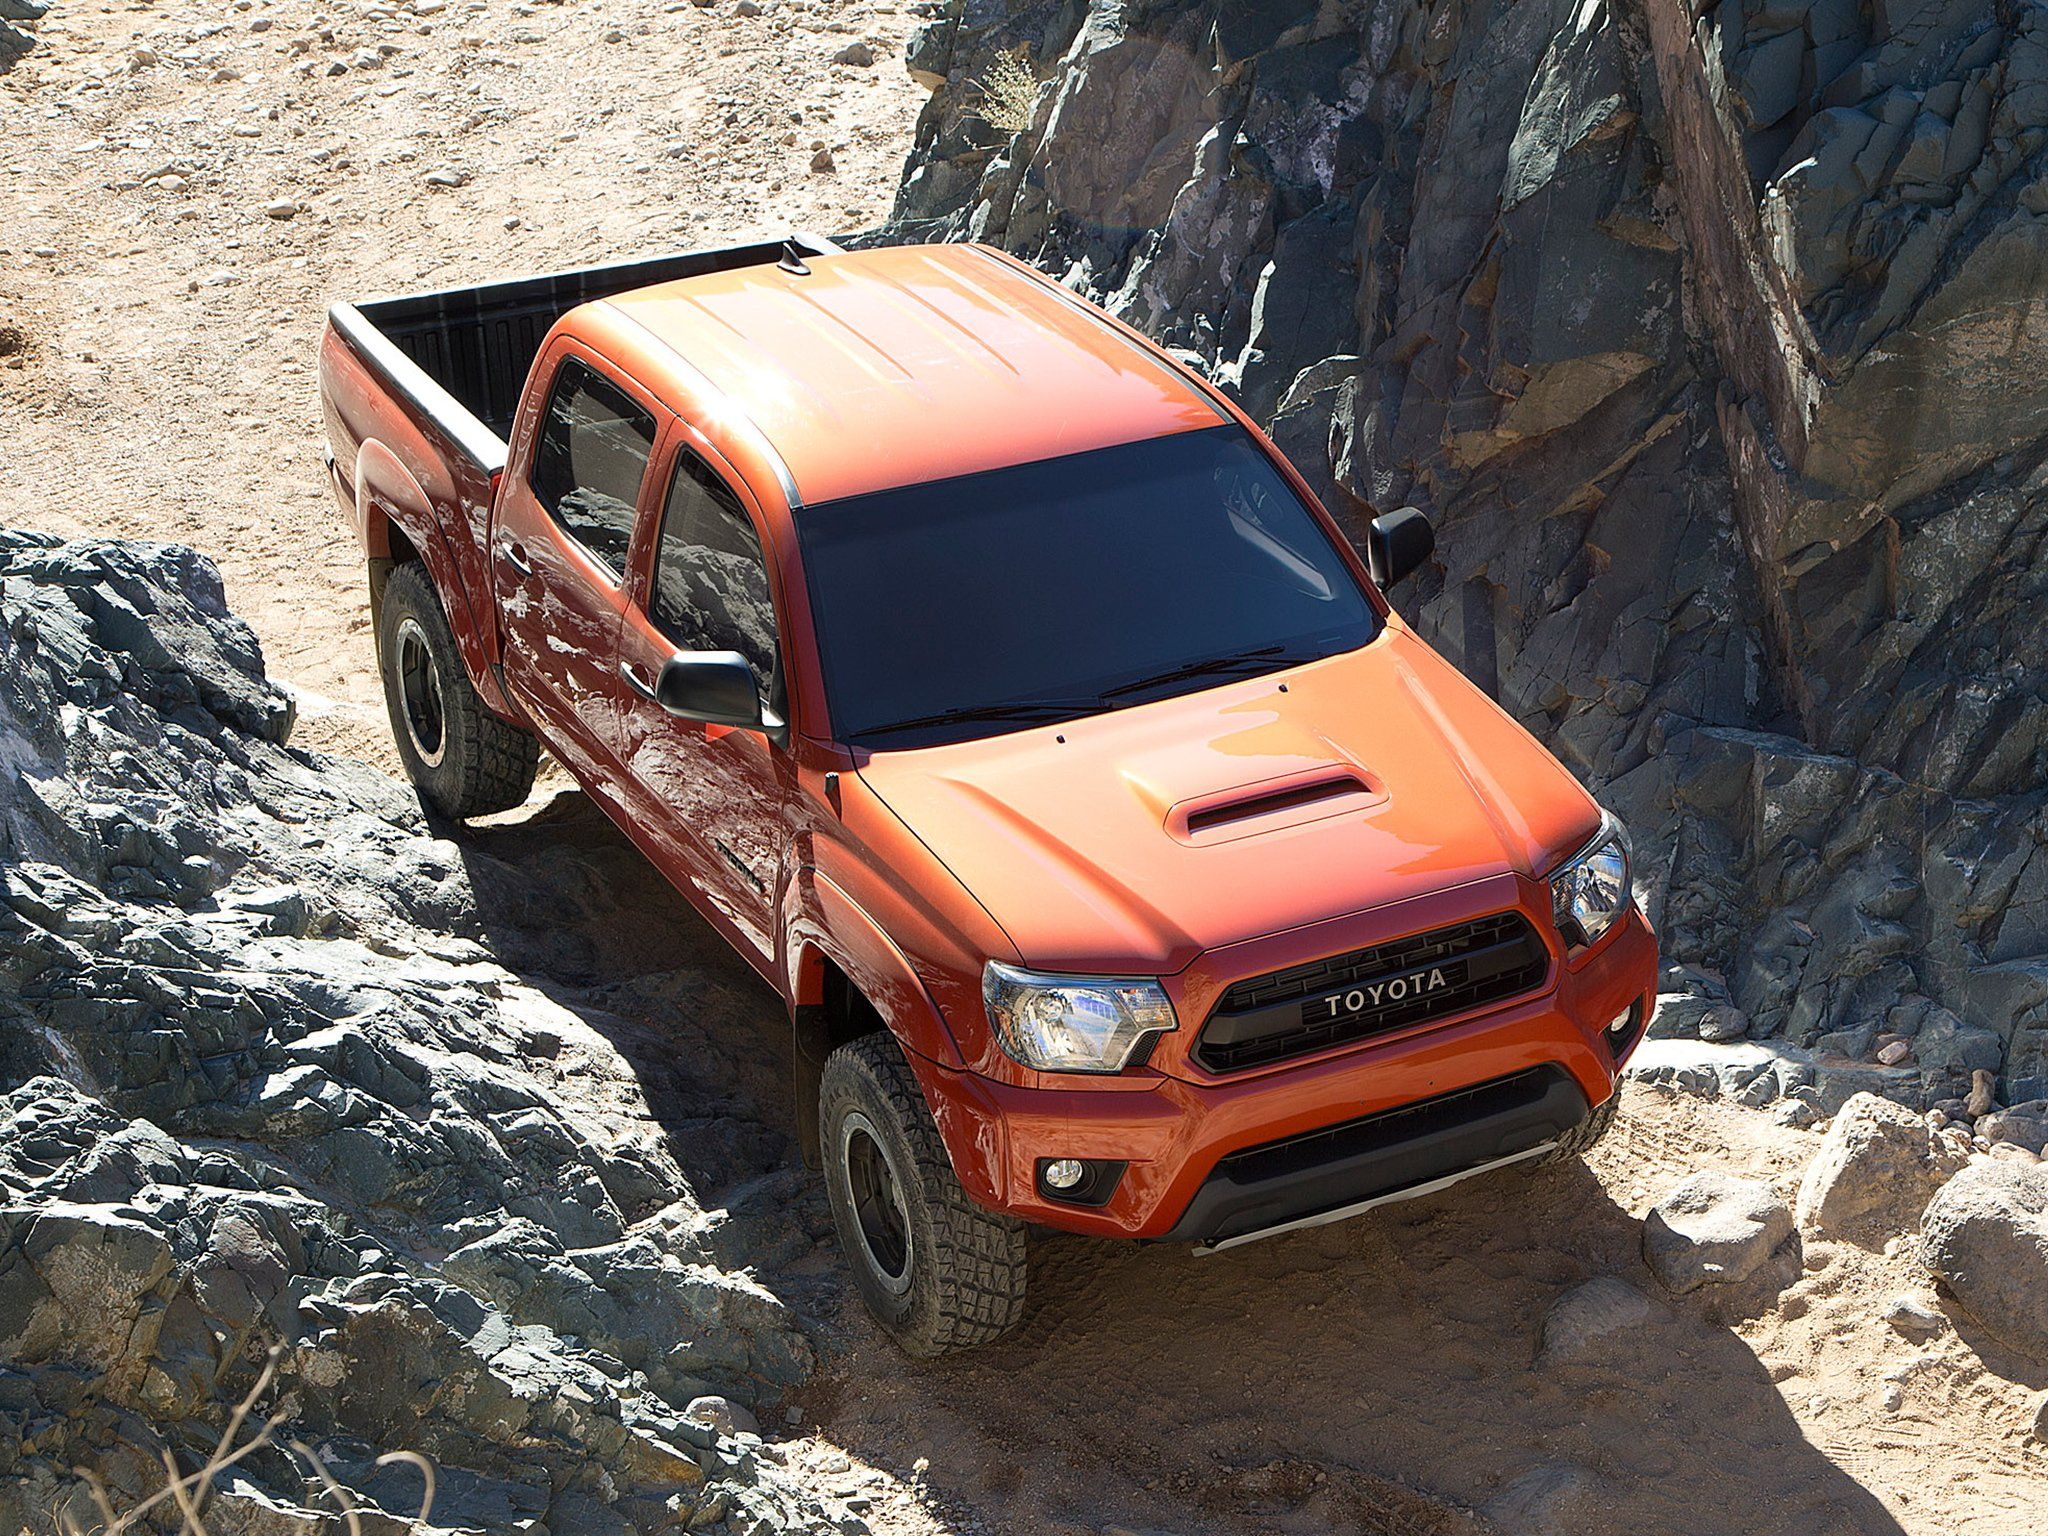 Toyota Truck Wallpapers - image #357